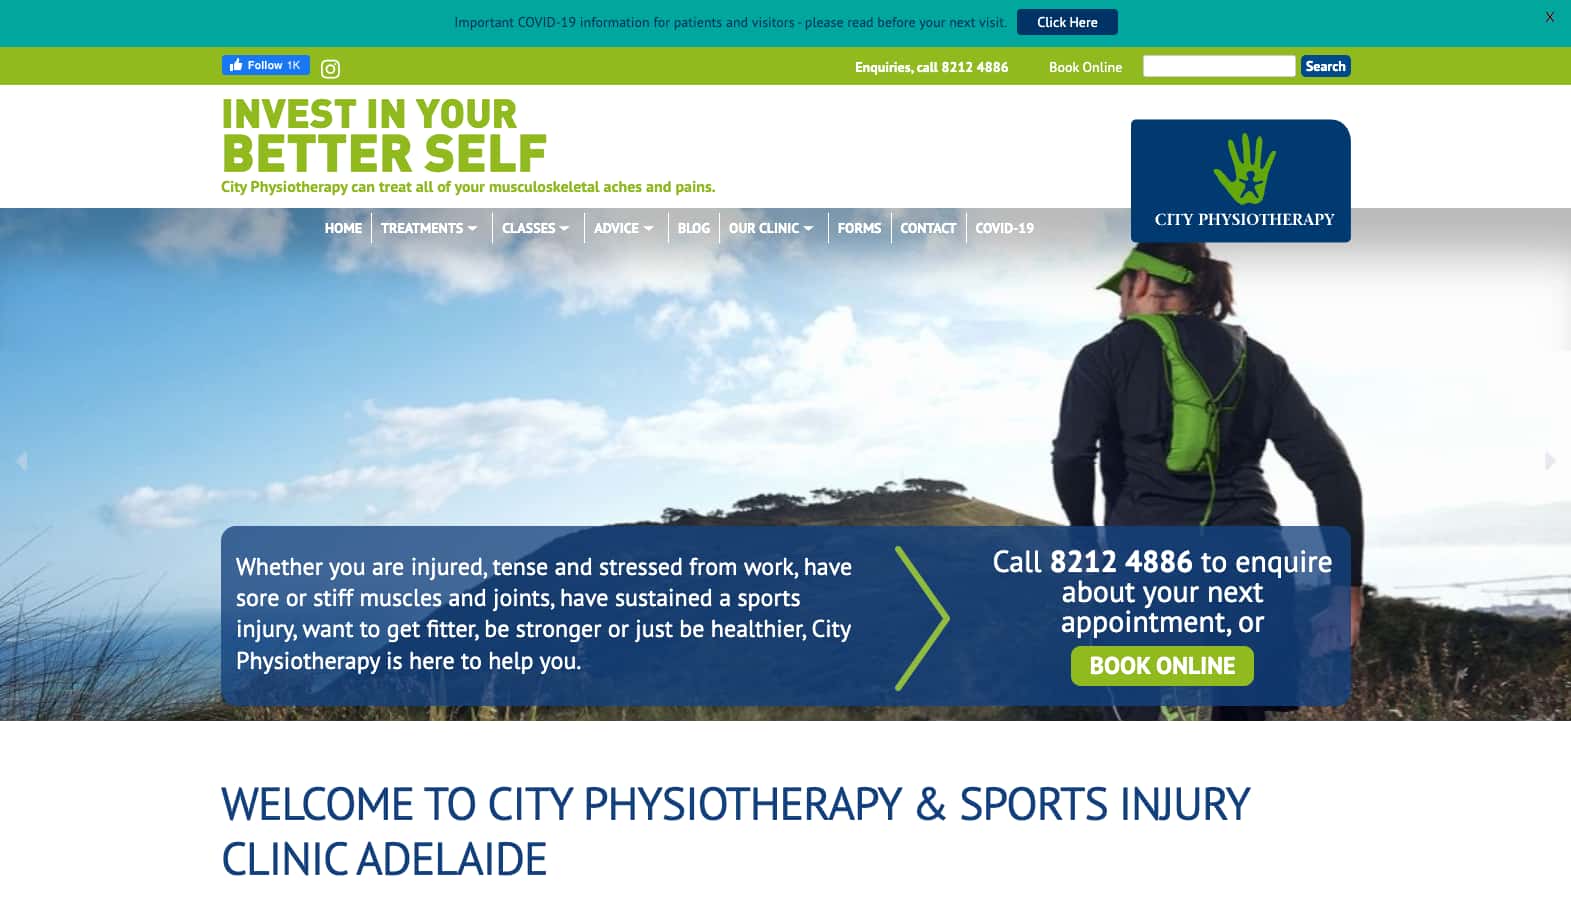 City Physiotherapy